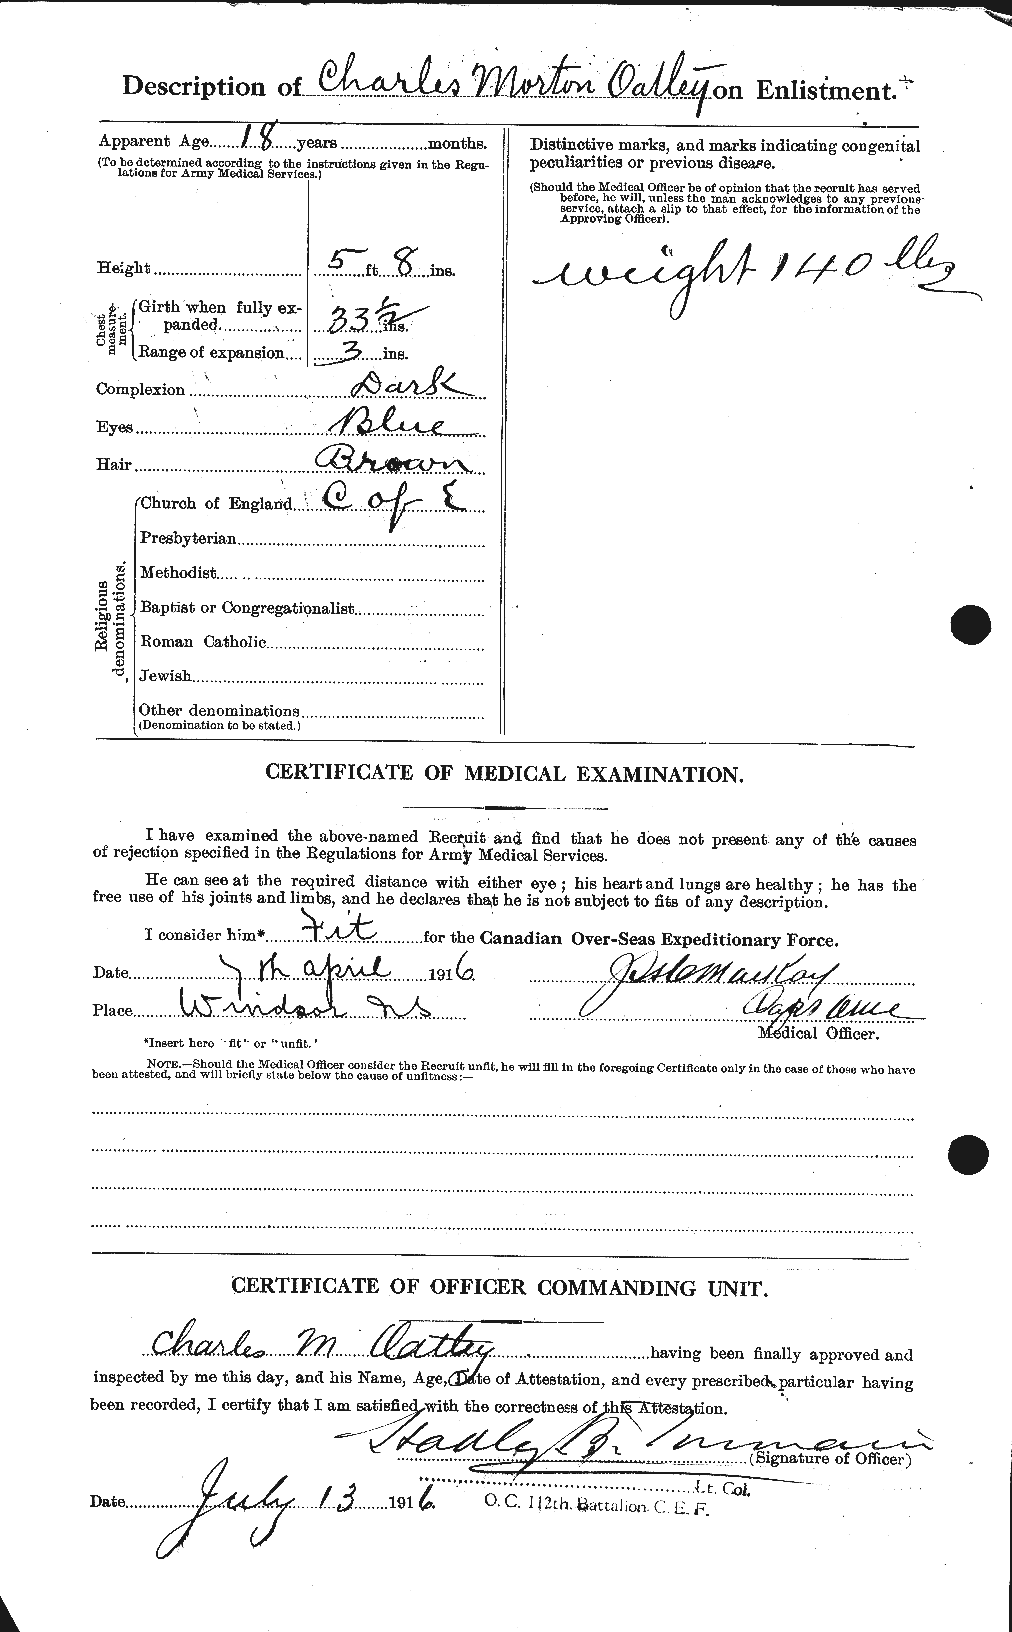 Personnel Records of the First World War - CEF 552560b